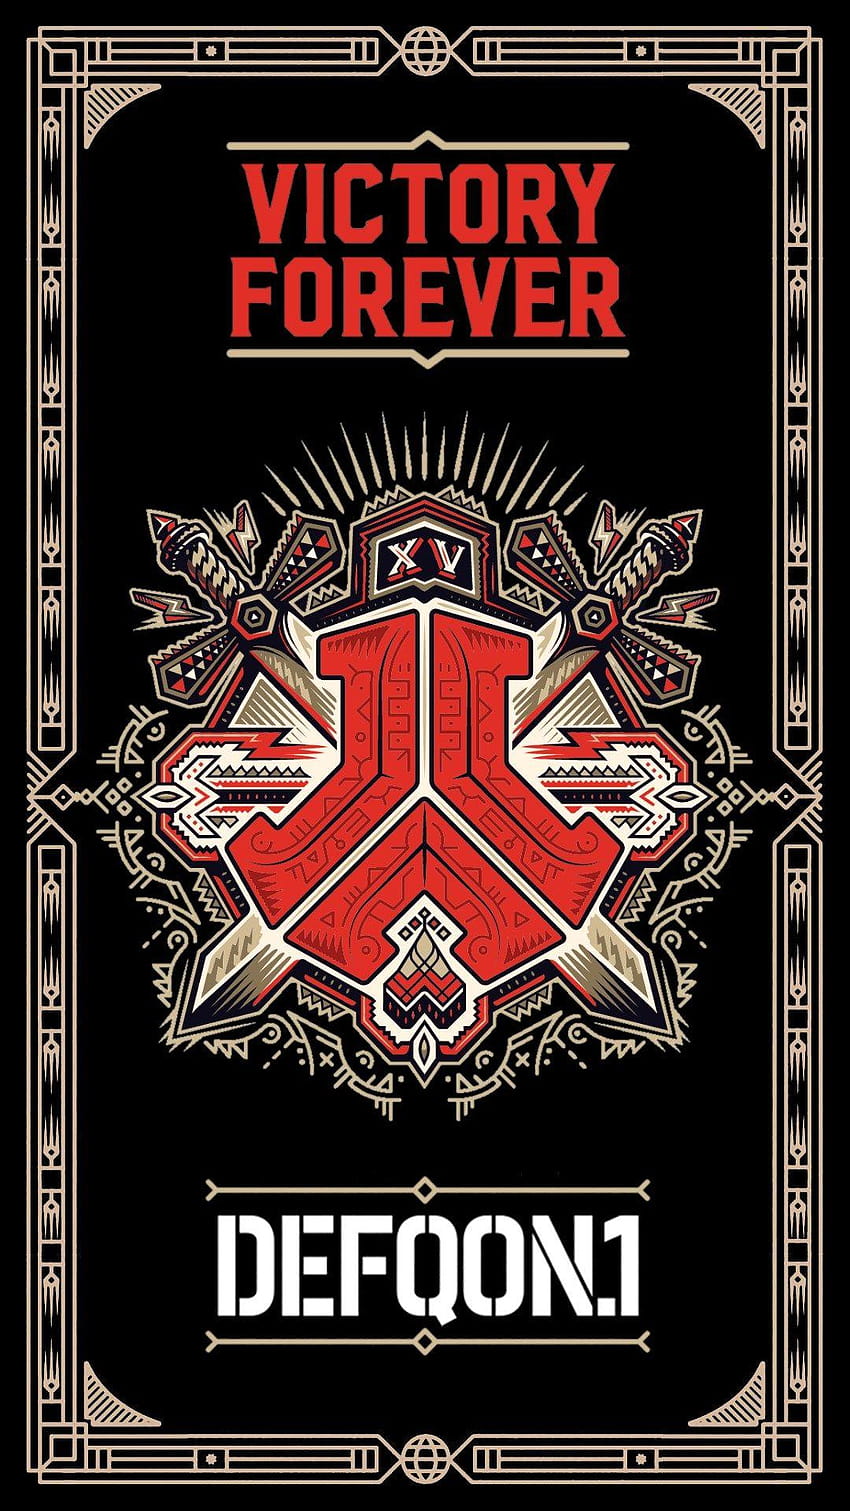 This Phone made by Handheldchimp except I switched Defqon, defqon1 HD phone wallpaper